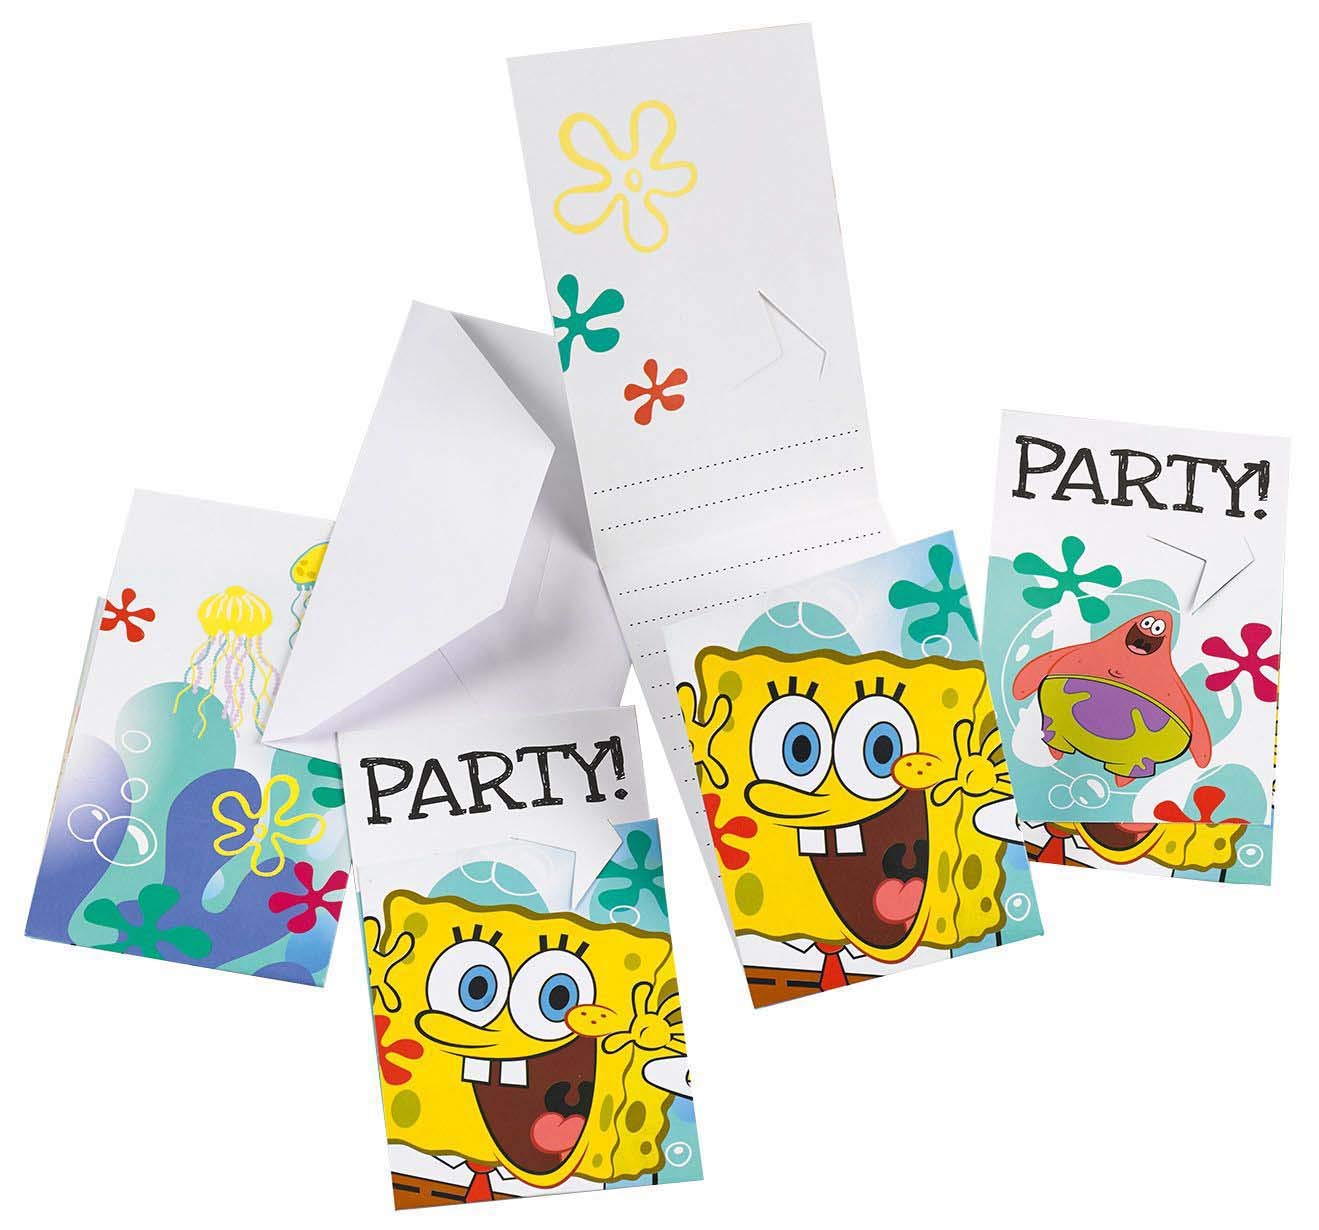 amscan 11011912 Party Invitations and Envelopes with Spongebob Theme-6 Pcs